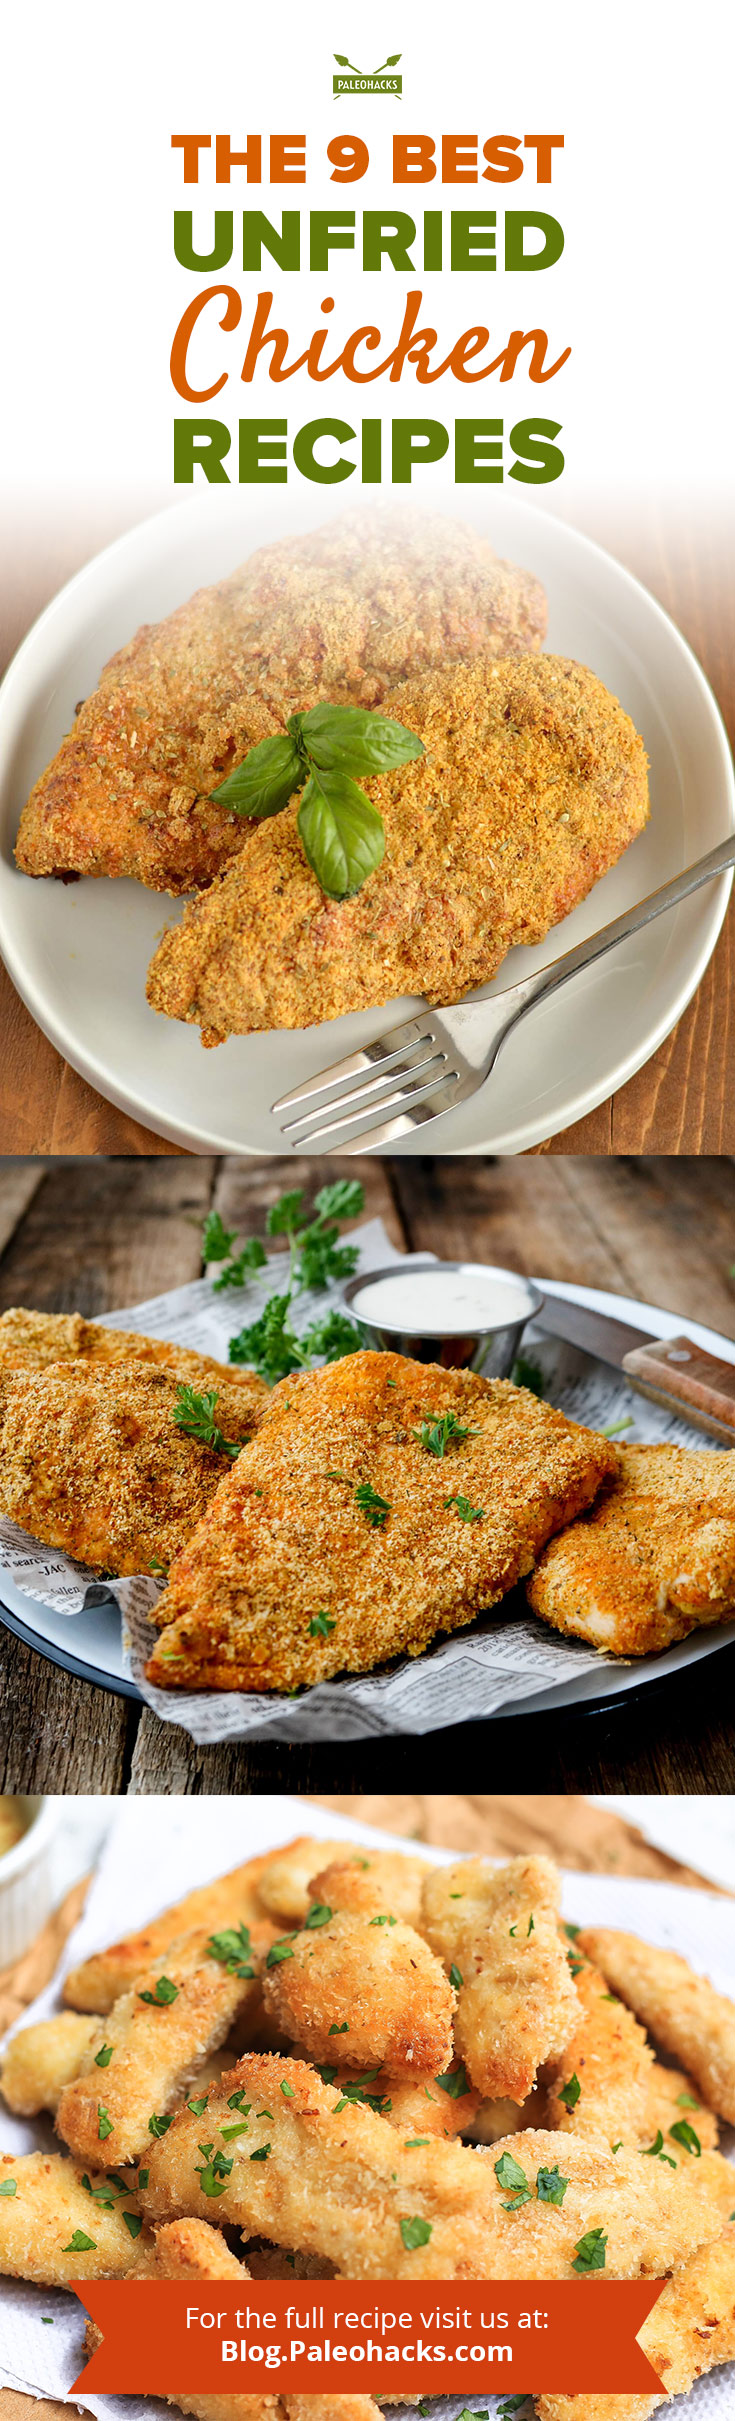 Ditch the fryer and bake these deliciously crispy unfried chicken recipes instead. KFC has nothing on these crispy recipes!